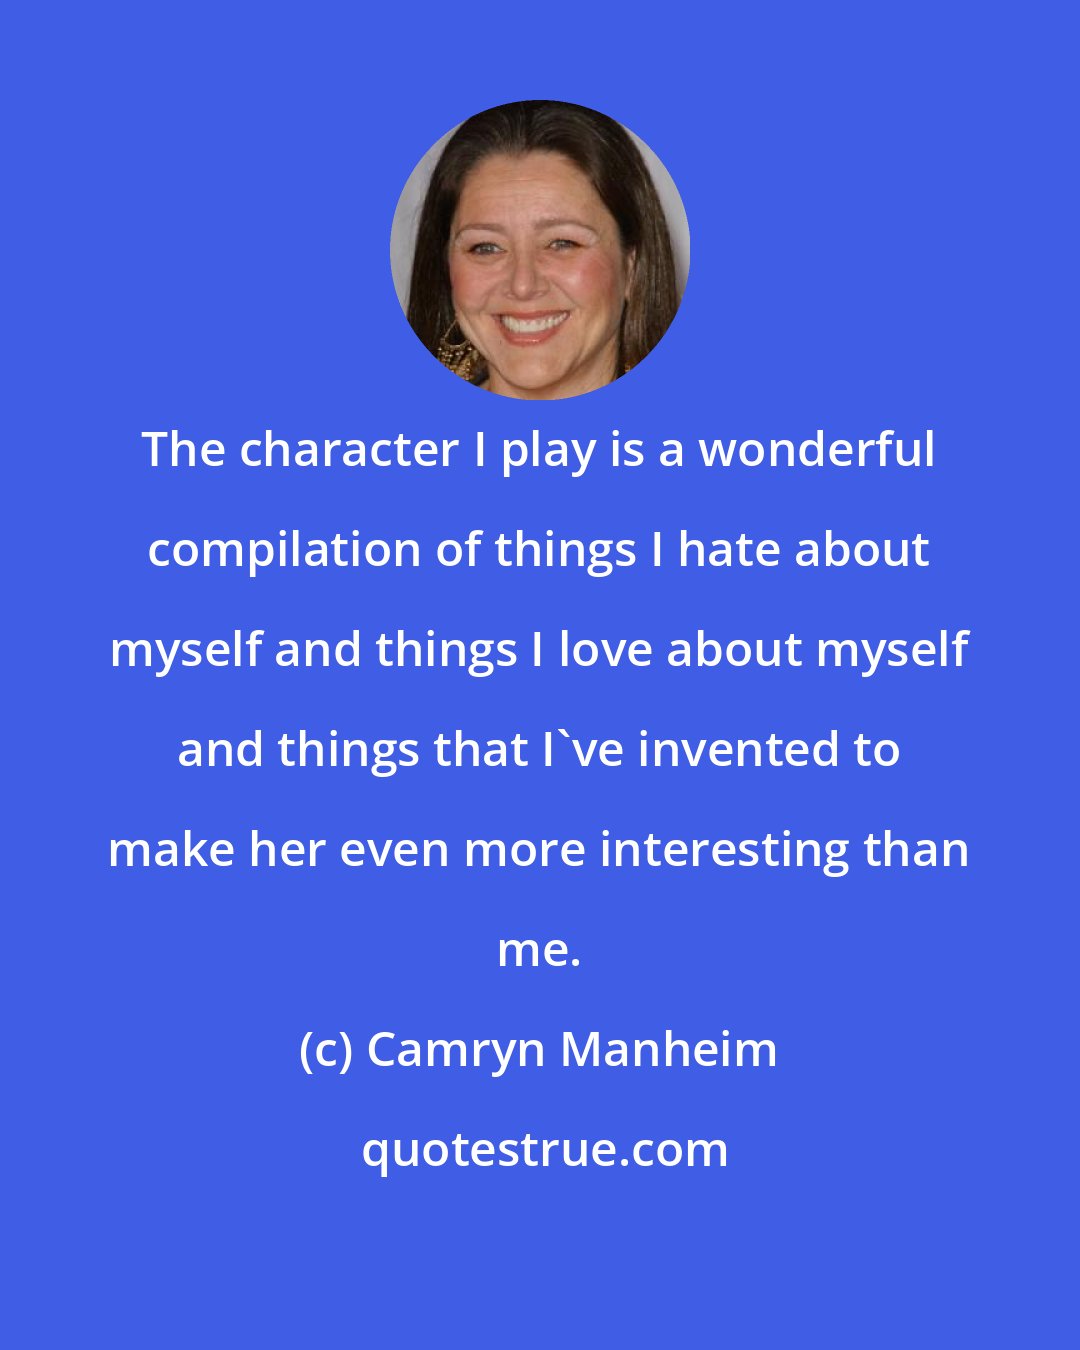 Camryn Manheim: The character I play is a wonderful compilation of things I hate about myself and things I love about myself and things that I've invented to make her even more interesting than me.